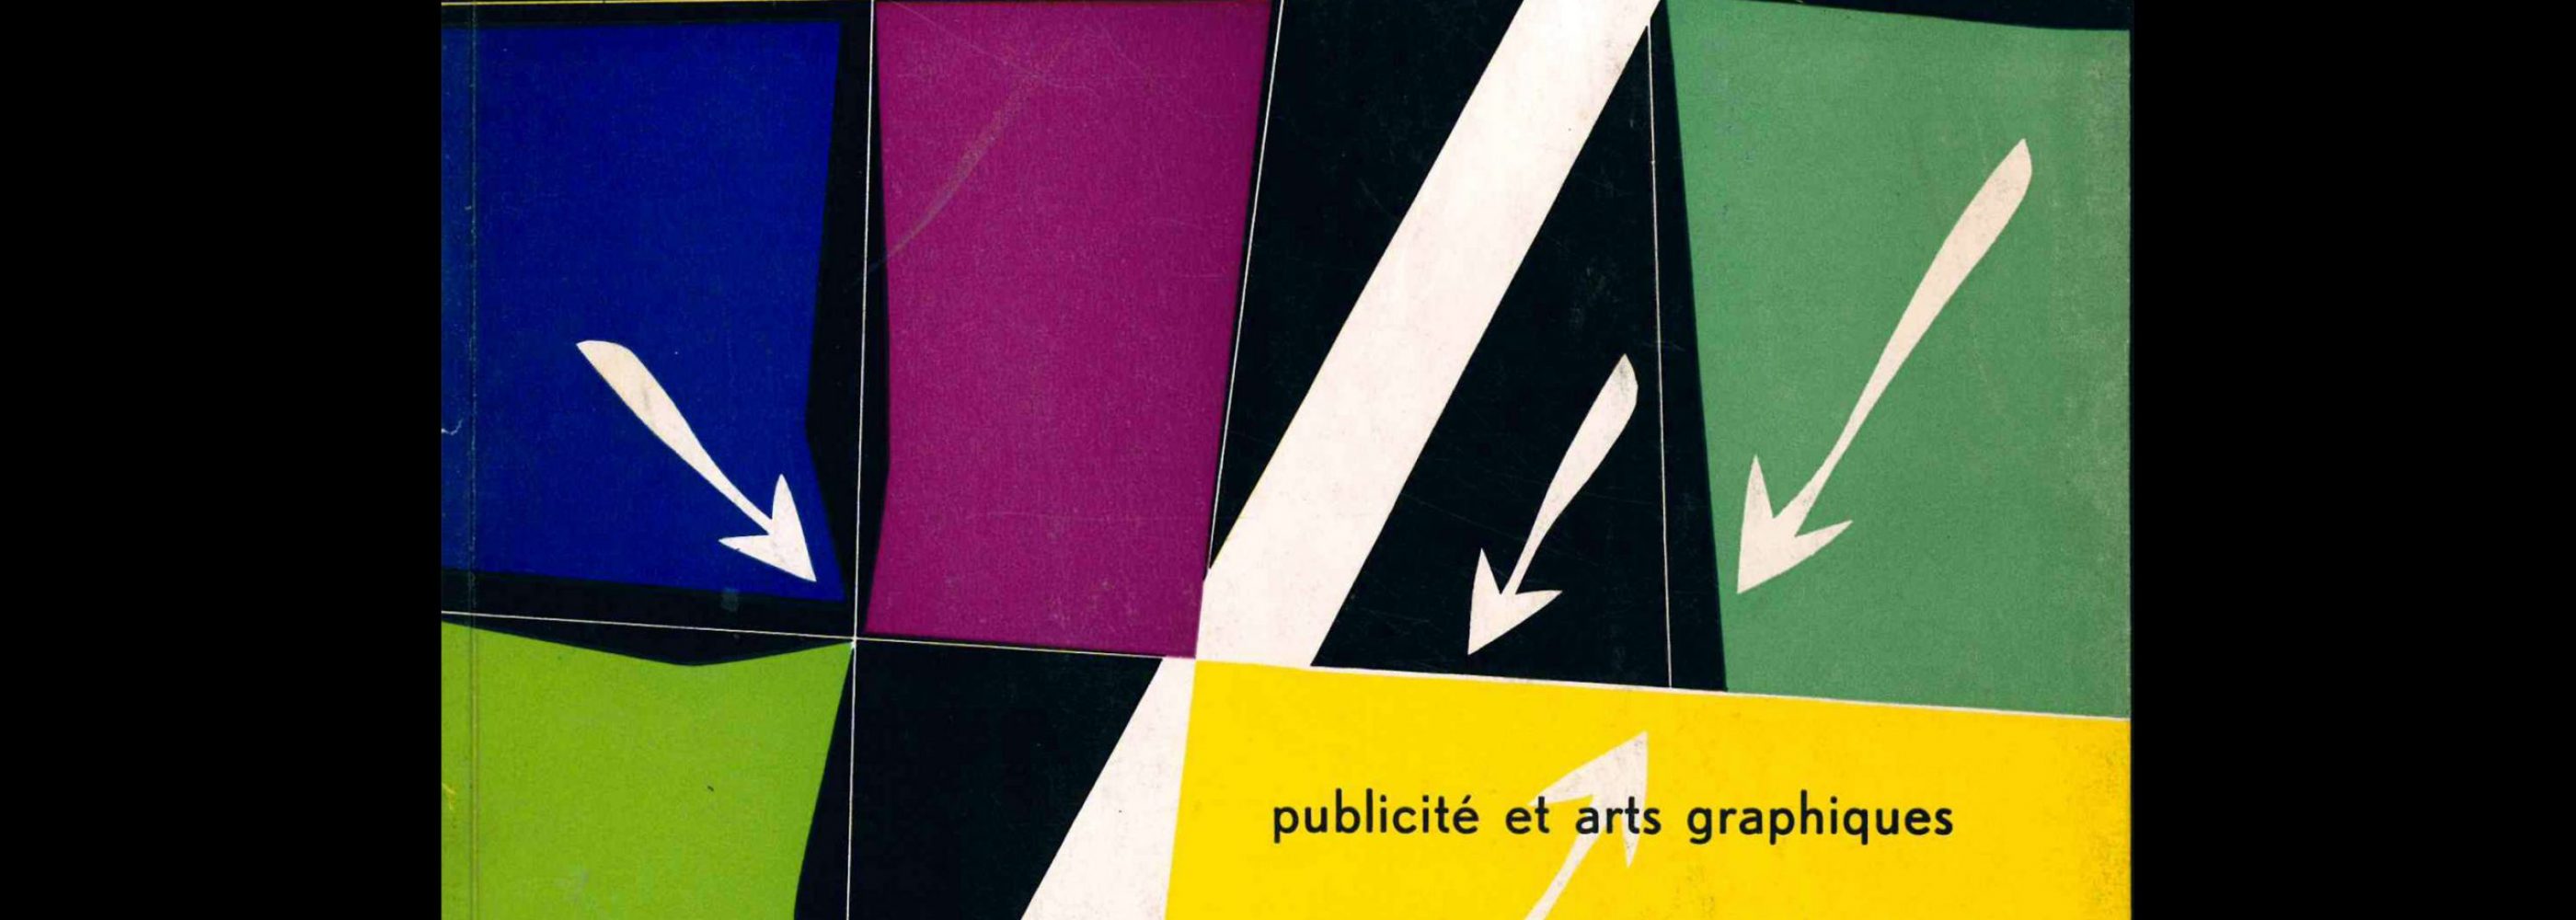 Publicité 7, Review of advertising and Graphic Art in Switzerland, 1953. Cover design by Pierre Monnerat